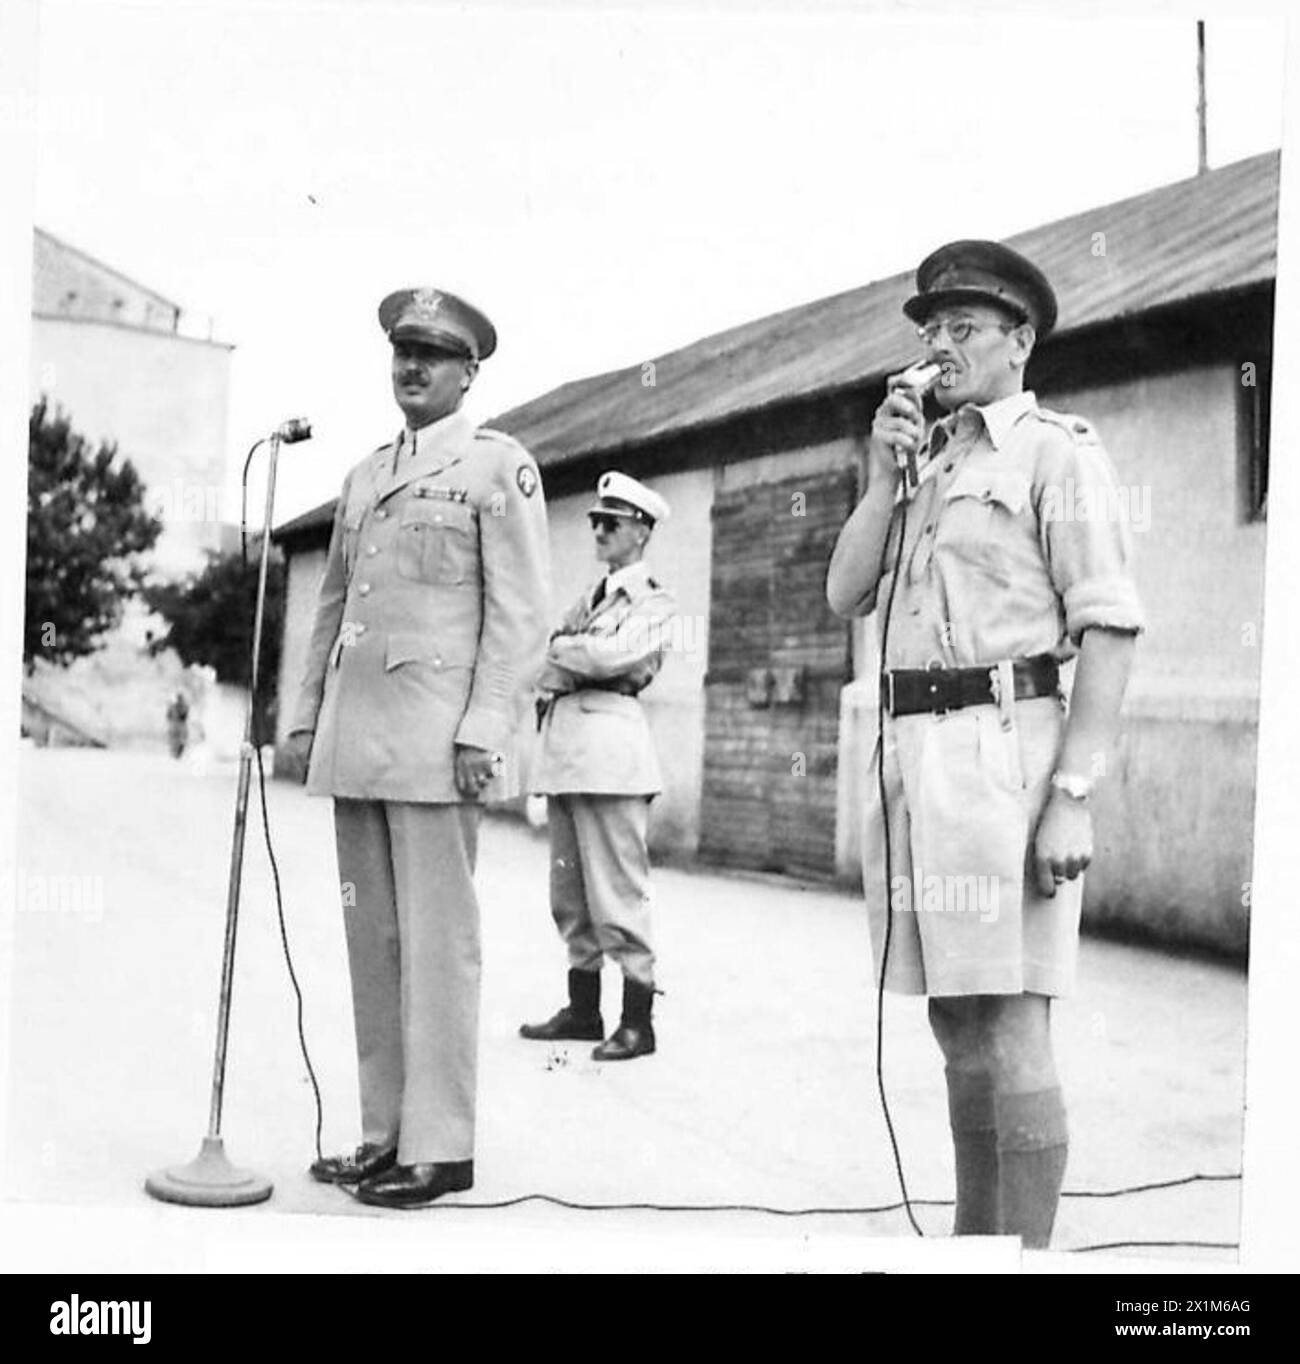 S.C.A.O. ADDRESSES NEWLY ENROLLED V.G. POLICE - Col. Alfred C. Bowman addressing the parade, with the assistance of Major J. Henderson (in shorts) who interpreted through a second microphone, British Army Stock Photo